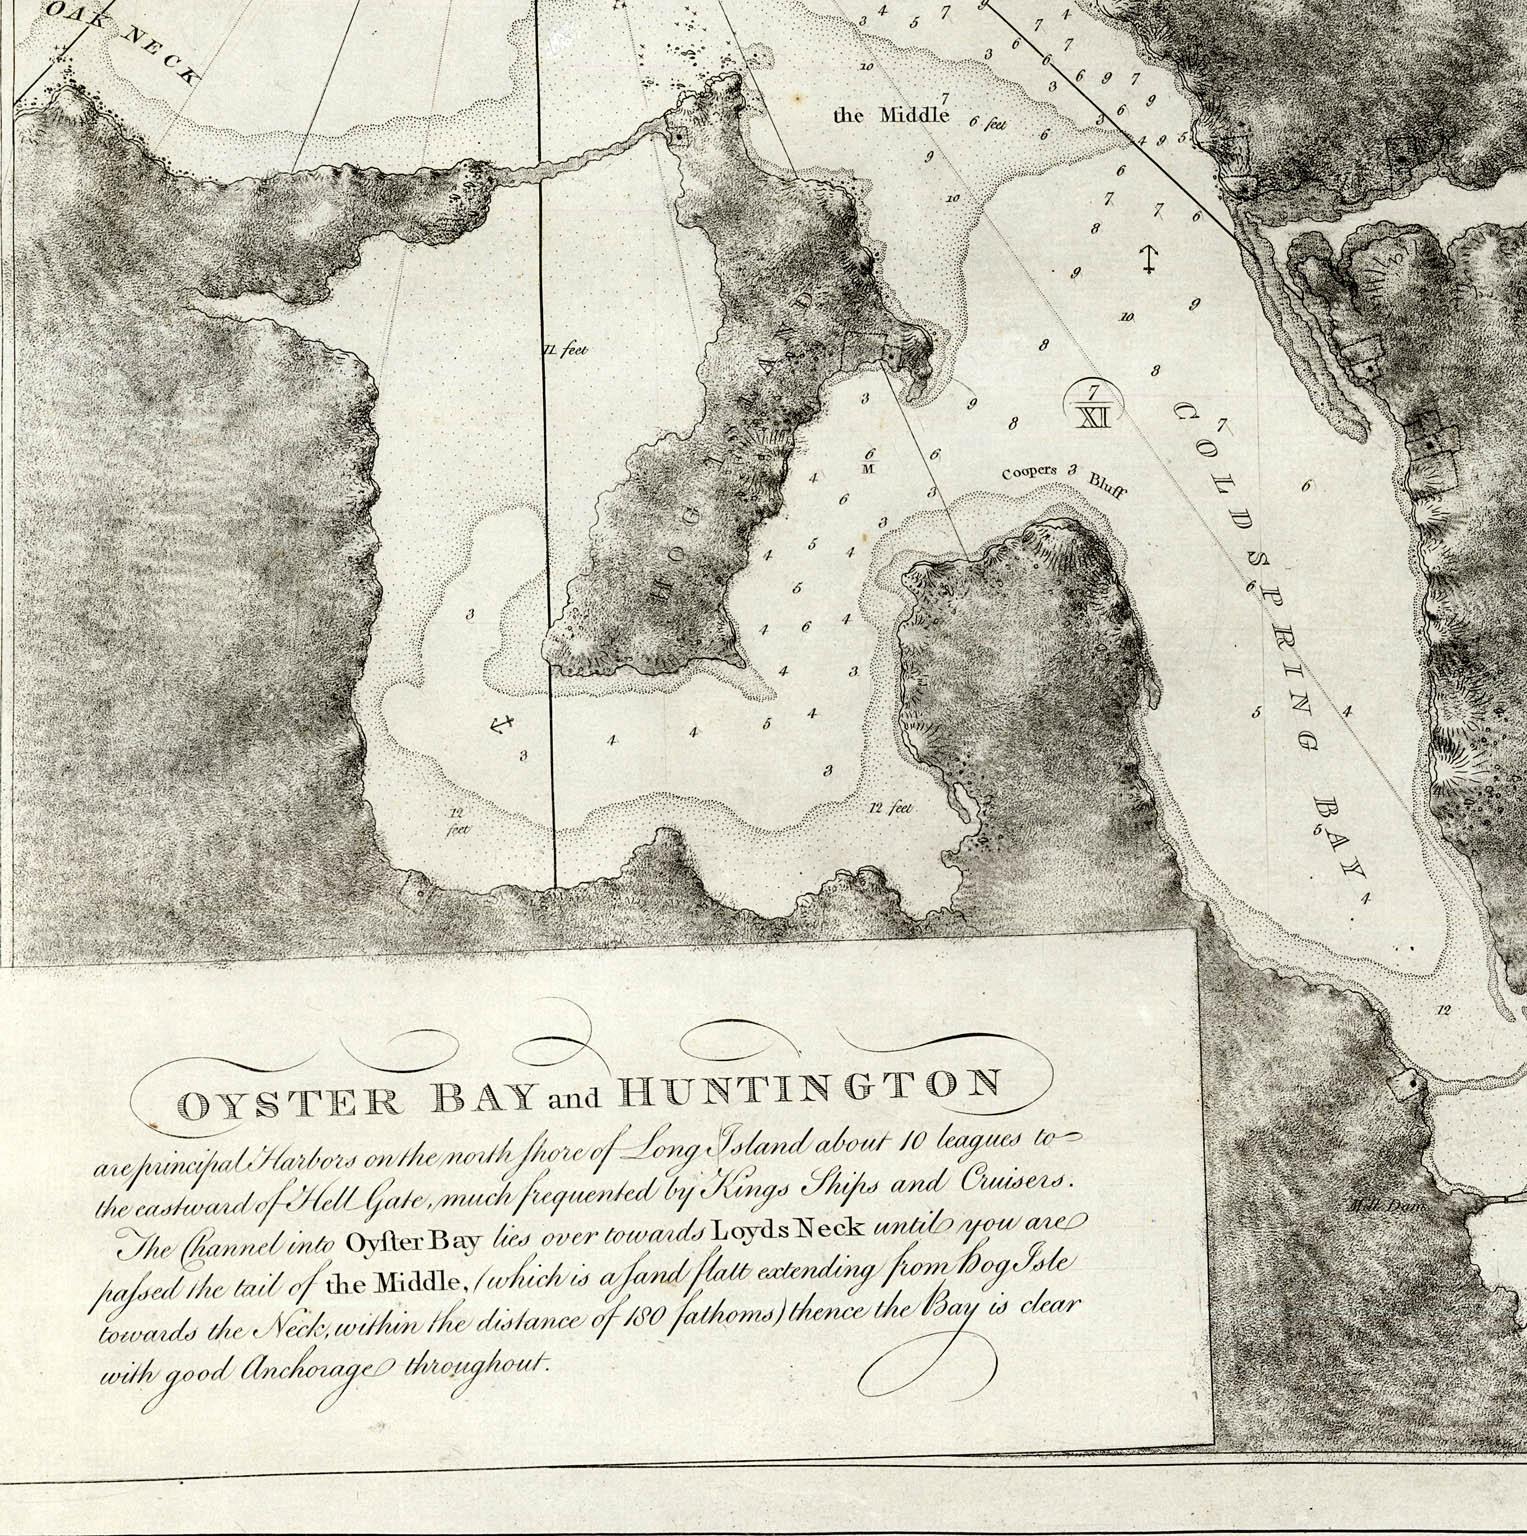 HELL GATE / OYSTER BAY AND HUNTINGTON / HUNTINGTON BAY. This aquatint and line engraved map was published according to Act of Parliament Novr. 19th, 1778.

This chart is from the 